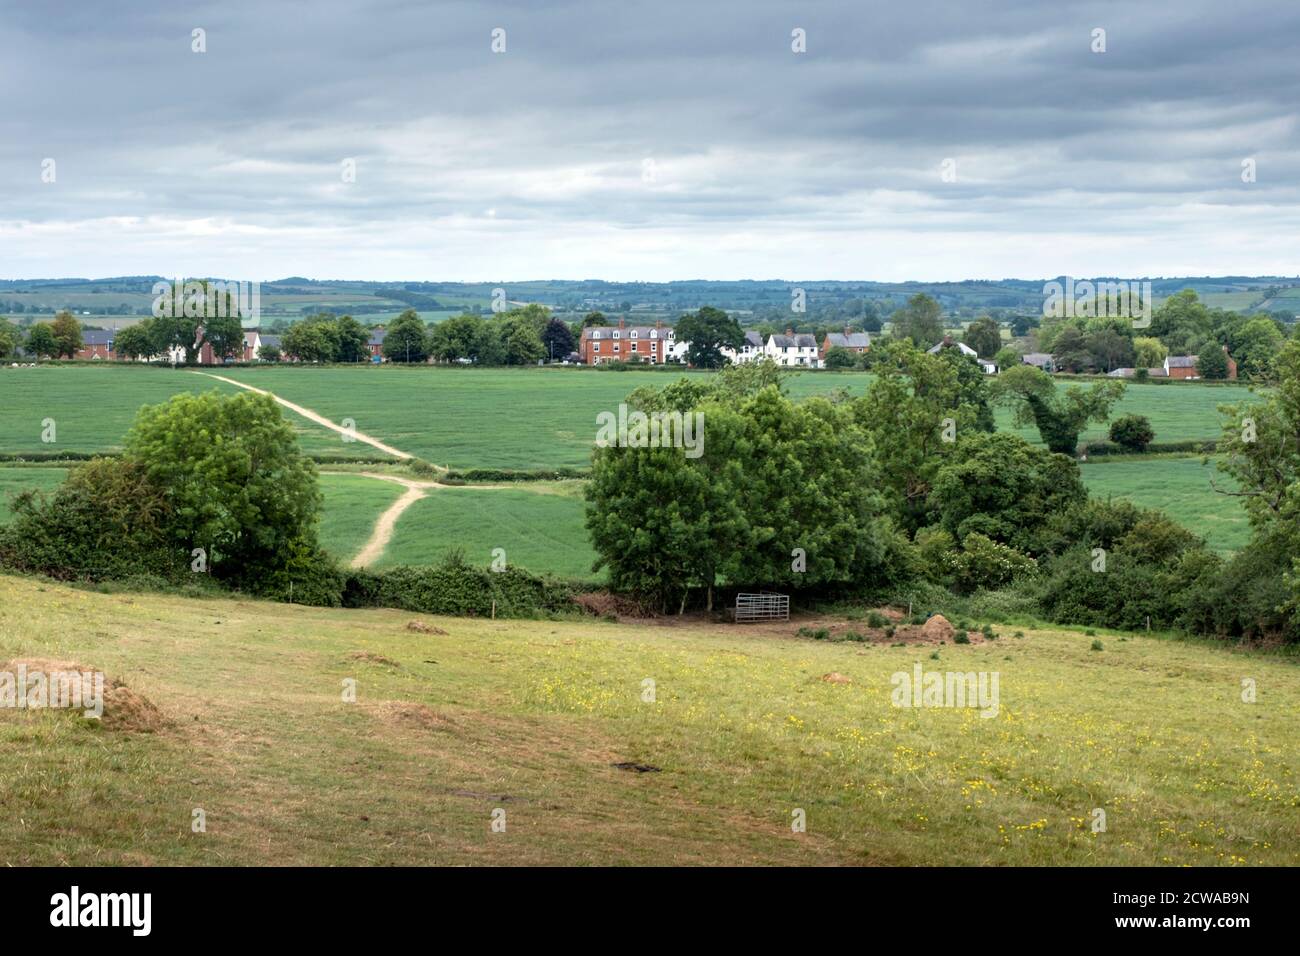 View towards the village of Great Bowden in the South Leicestershire countryside near Market Harborough, England. Stock Photo